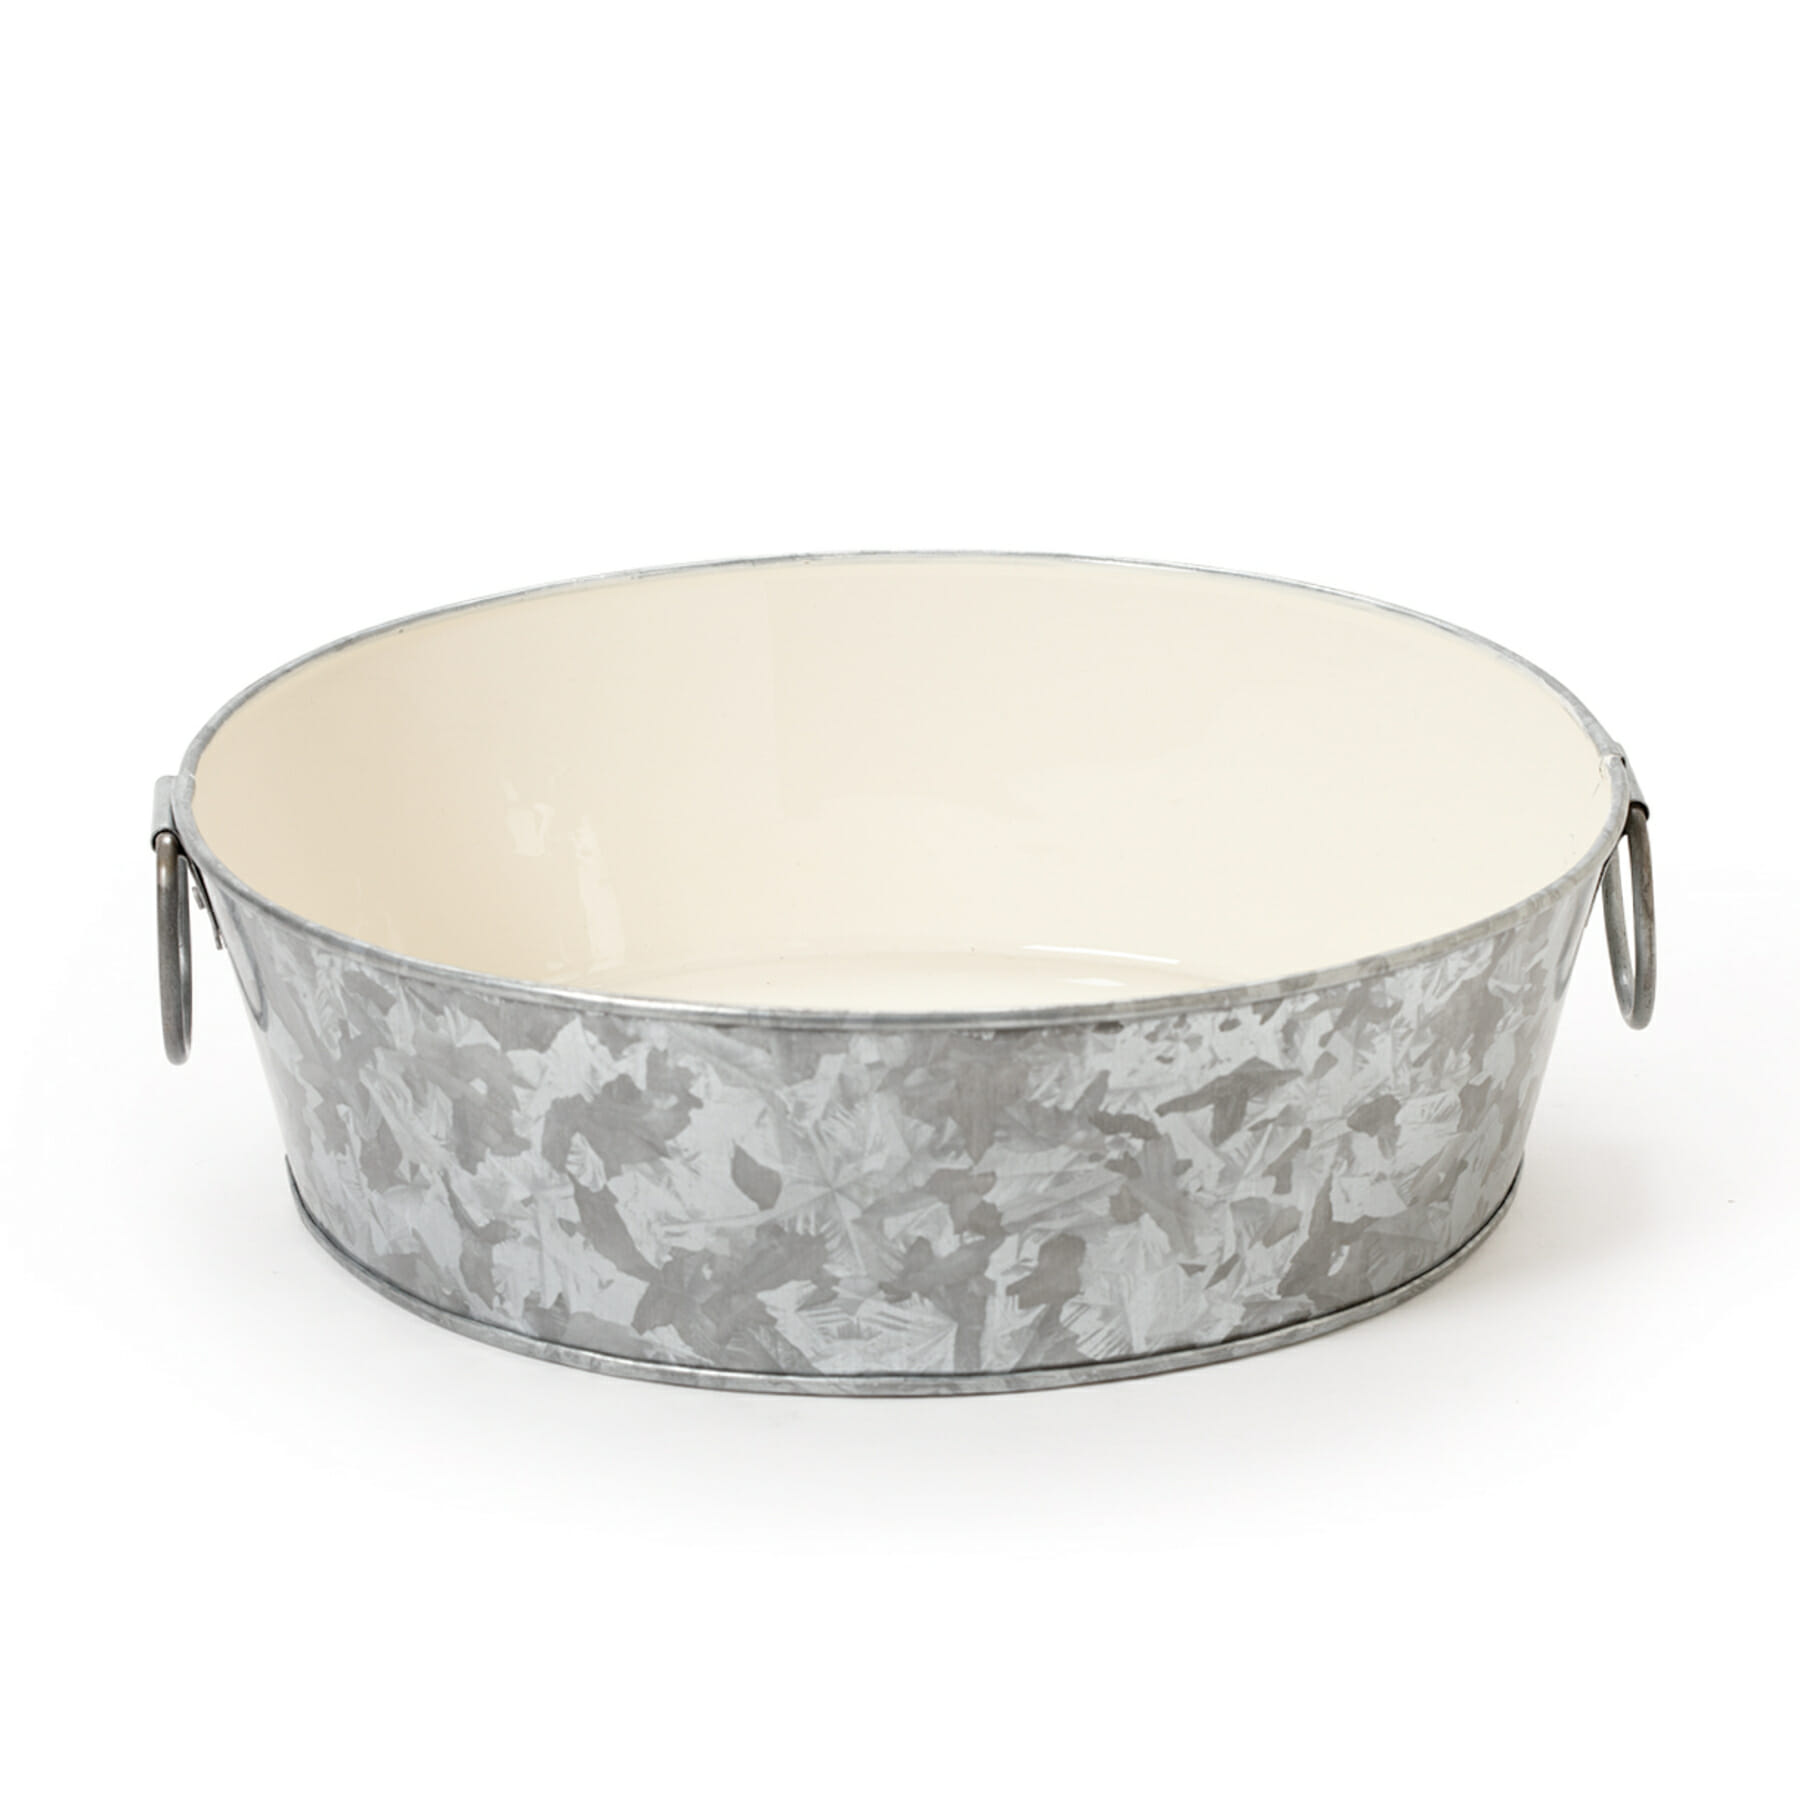 10.5" Dia. Round Galvanized Tray  with Ivory Powder Coated Interior (13.5" with Handles), 3" deep